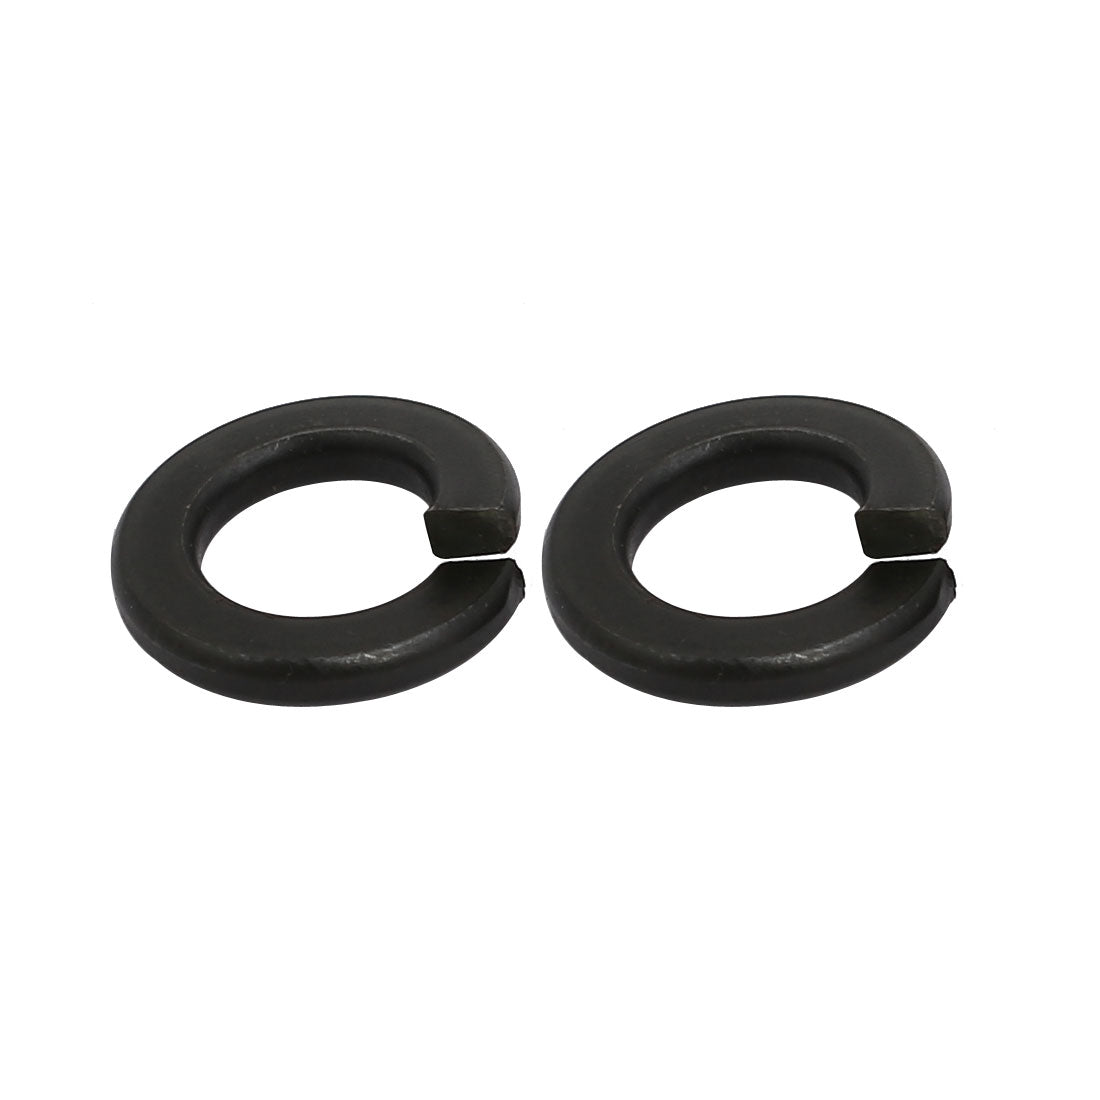 uxcell Uxcell 30pcs 3/8-inch Inner Dia Carbon Steel Split Lock Spring Washer Gasket Black